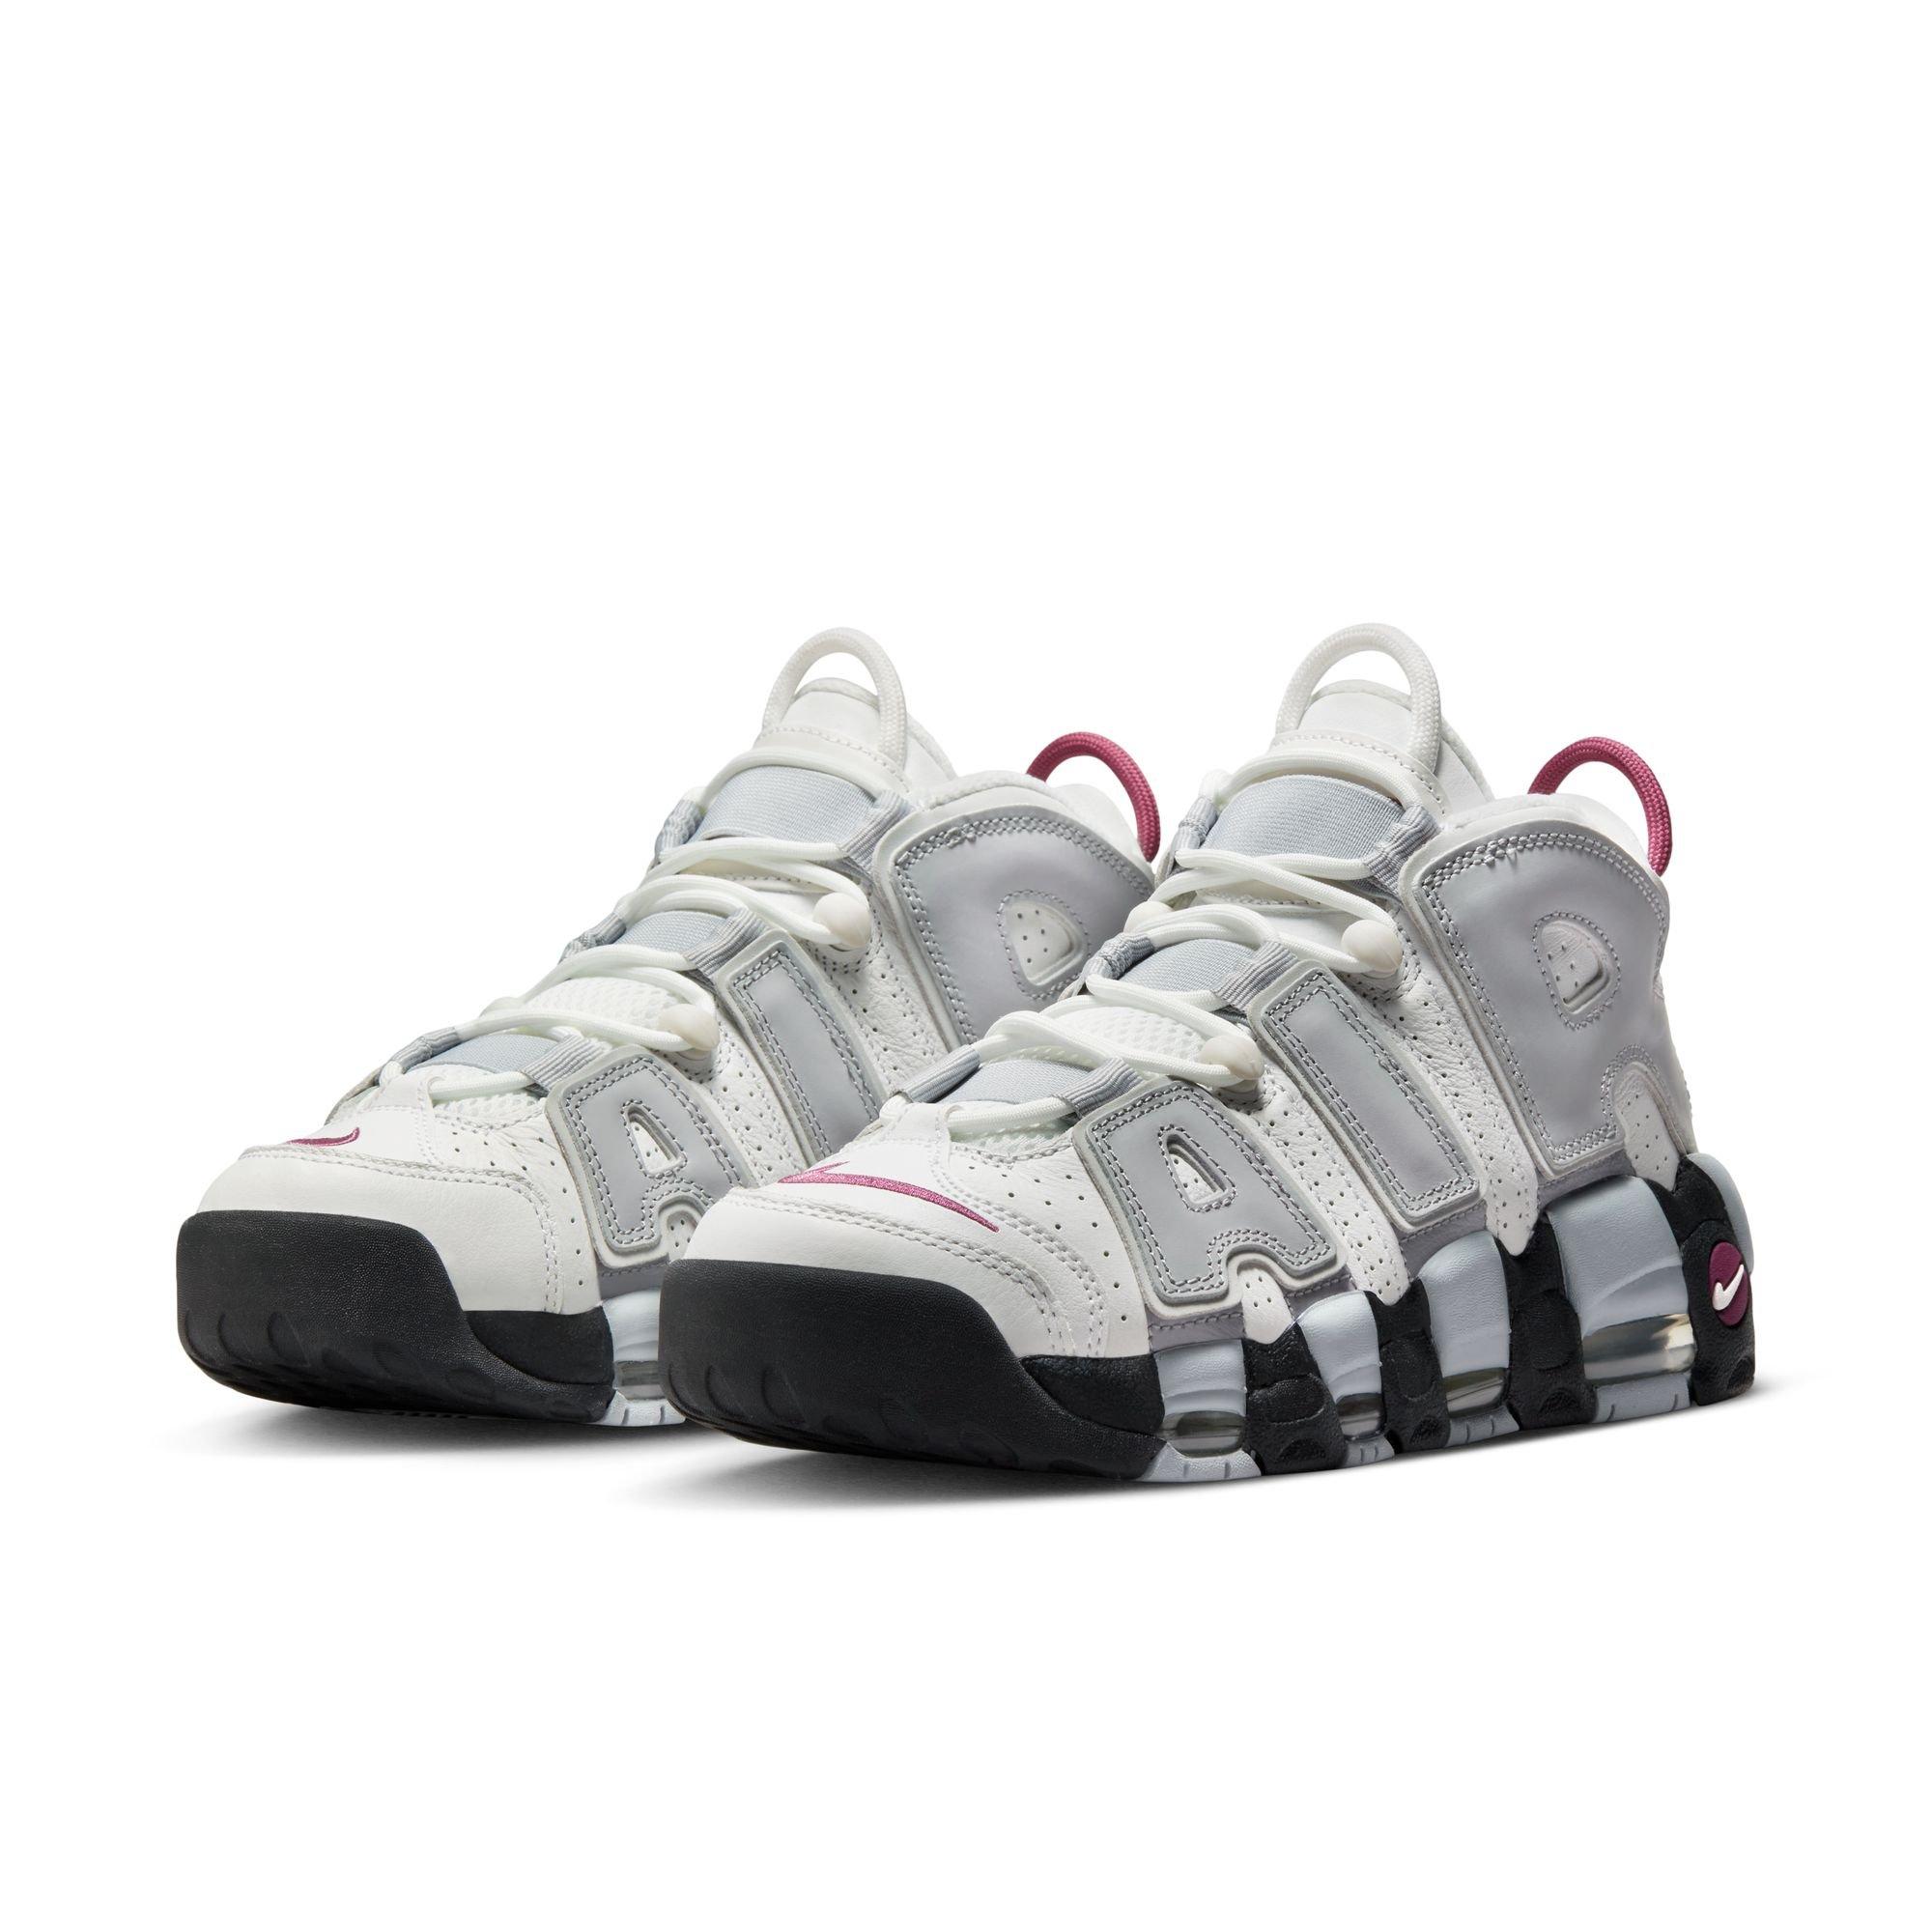 Nike Air More Uptempo "Summit White/Rosewood/Wolf Women's Shoe